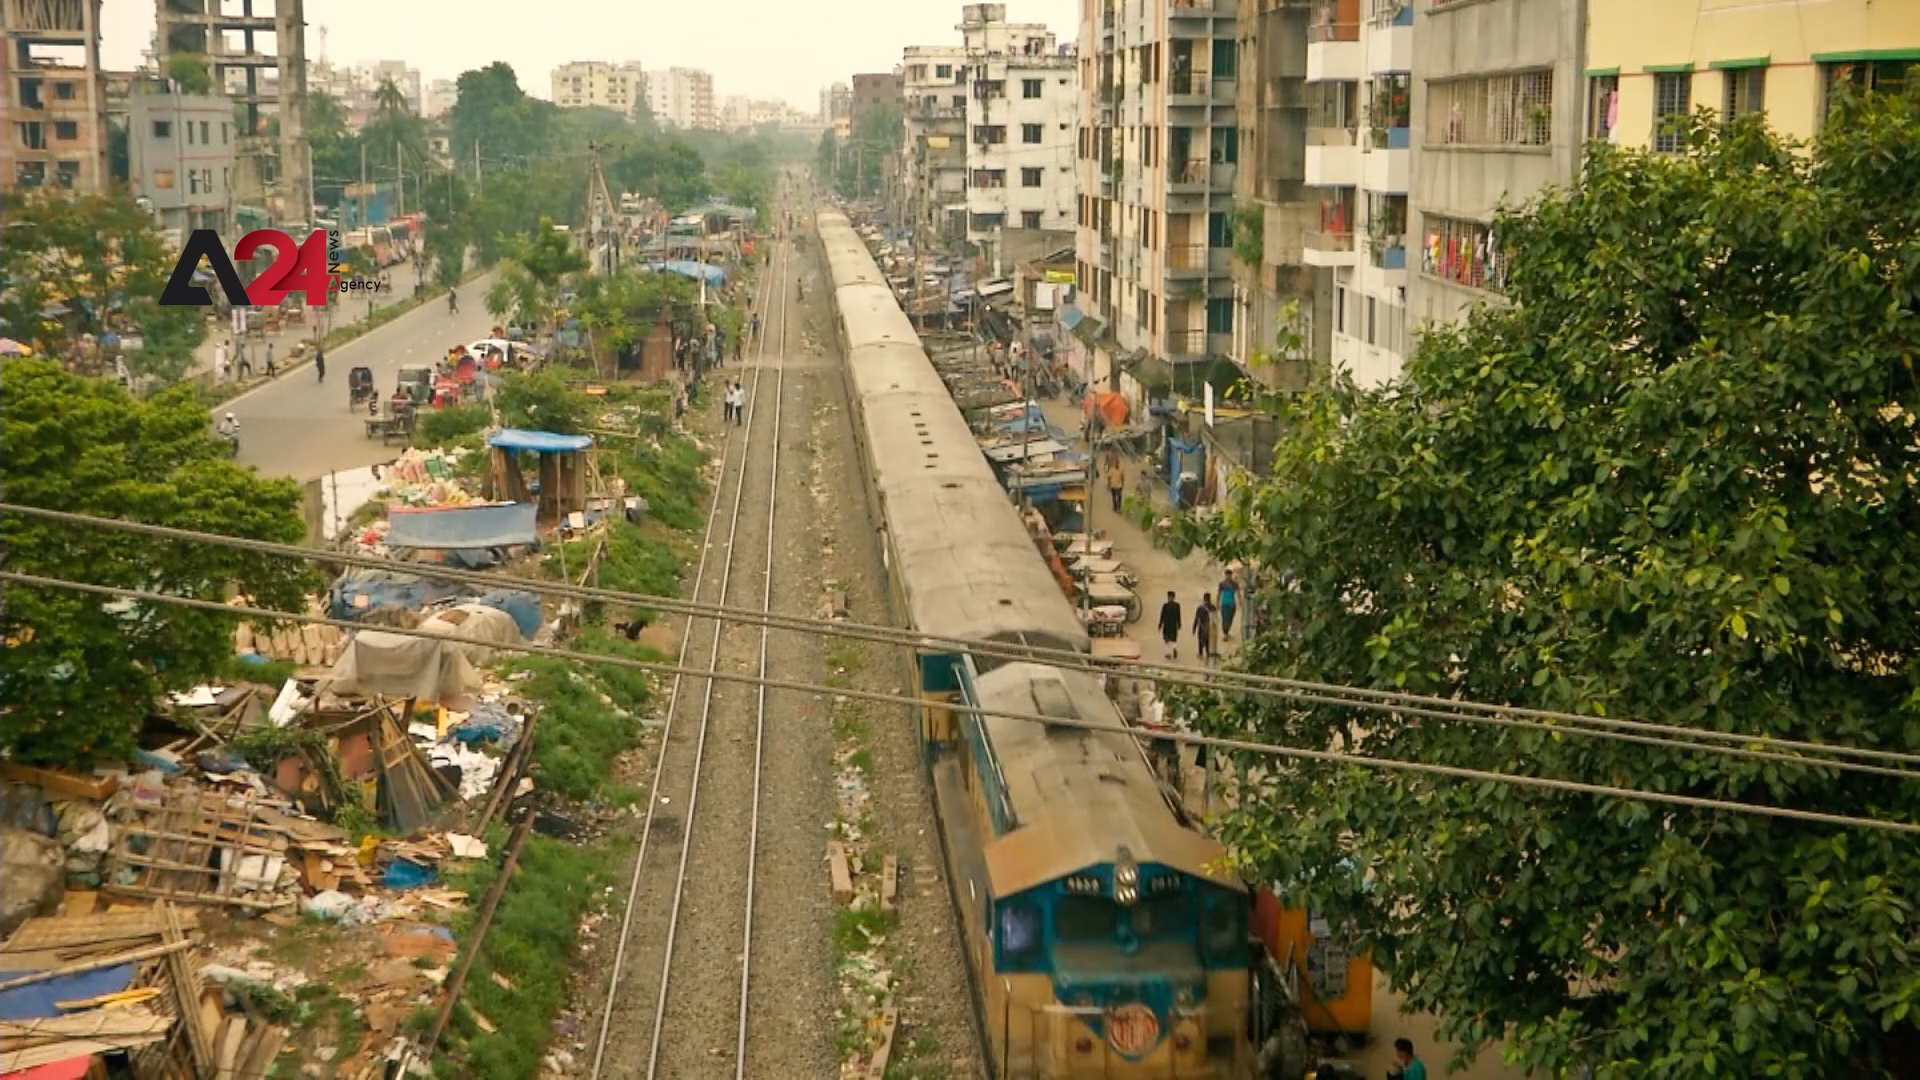 Bangladesh- Slums dotted with railway sides in Dhaka